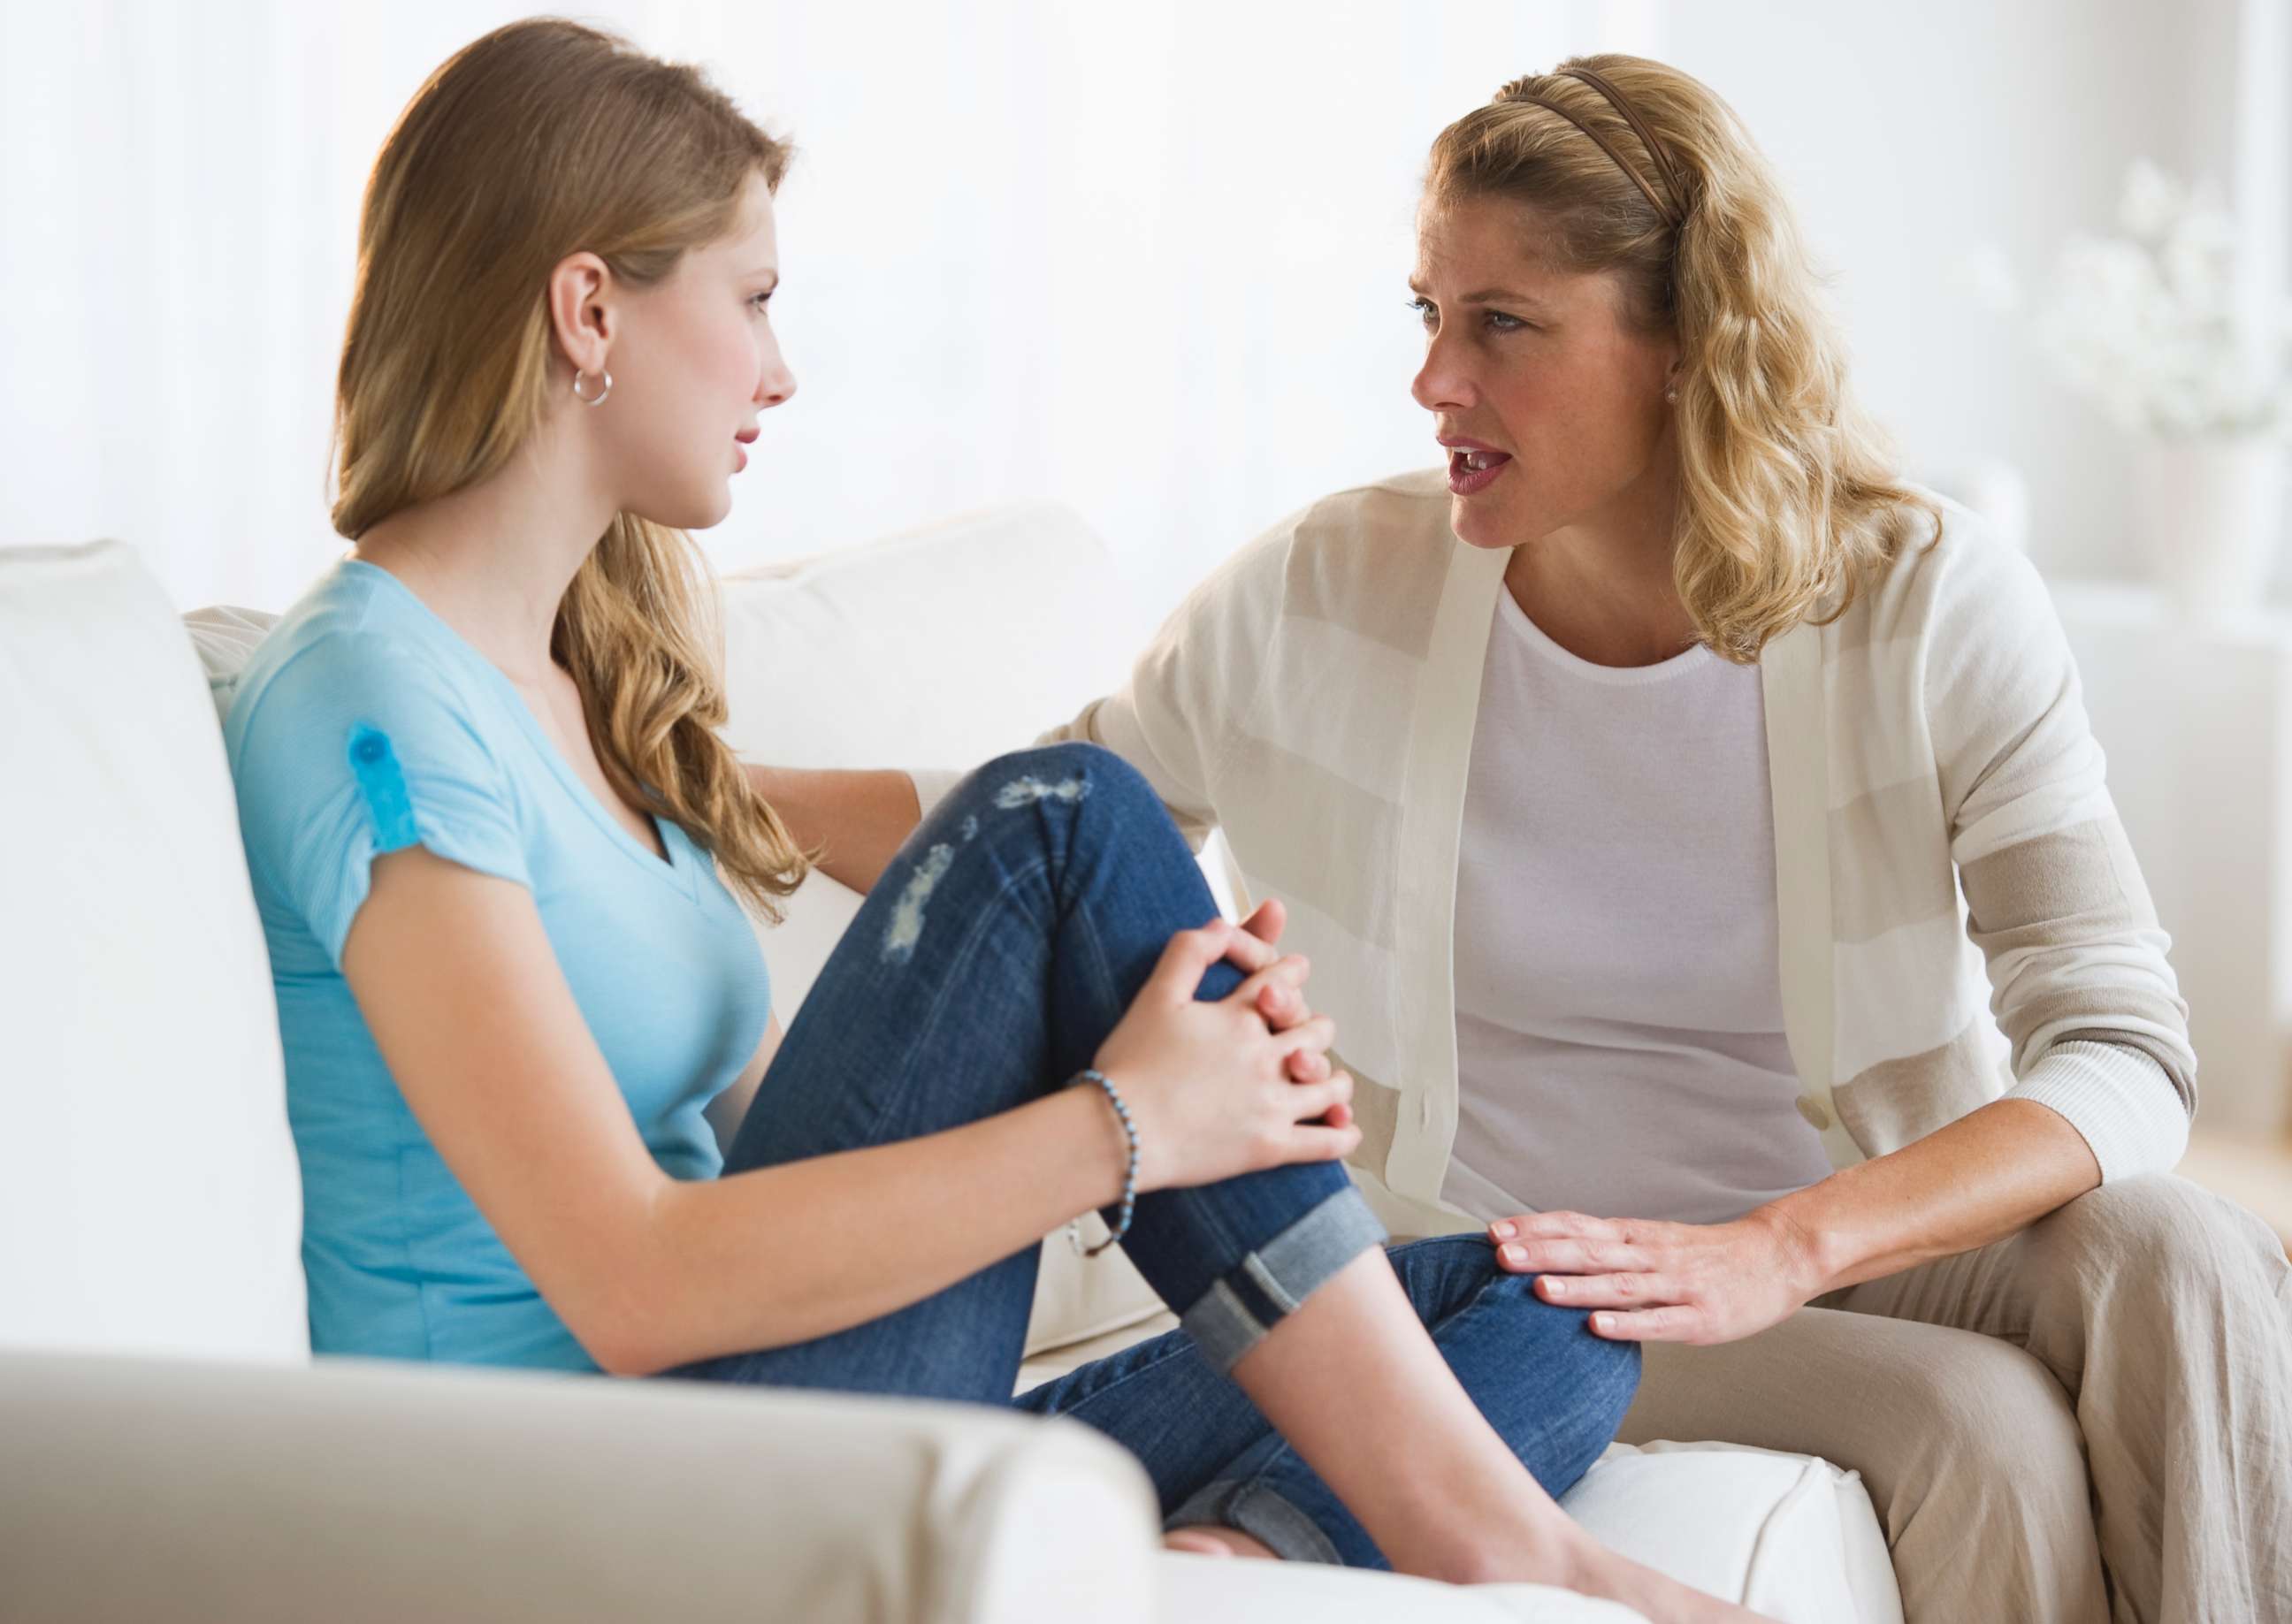 PHOTO: A mother and daughter having a conversation in this undated stock photo.